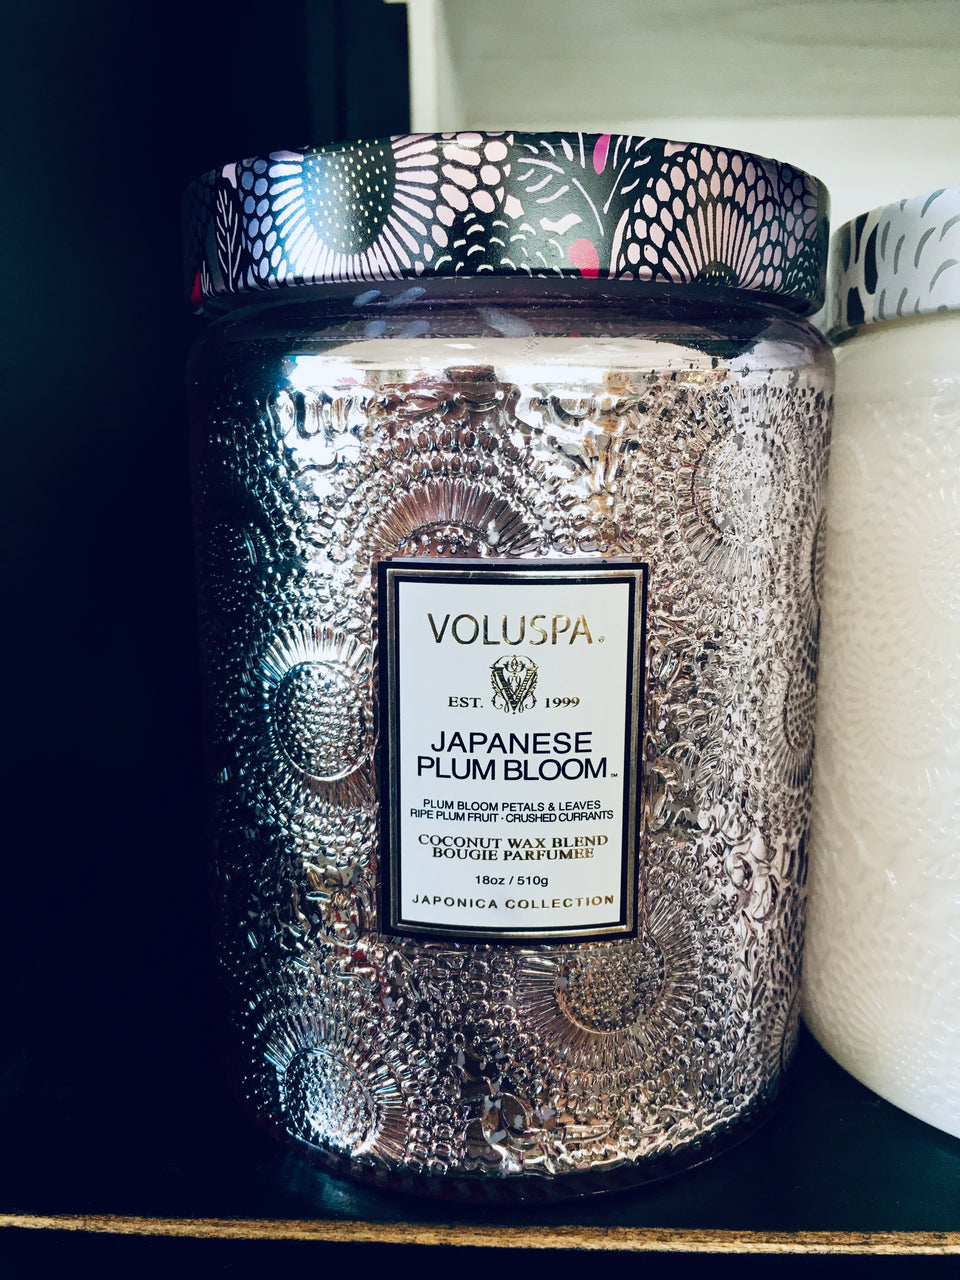 Voluspa tall candles in textured glass